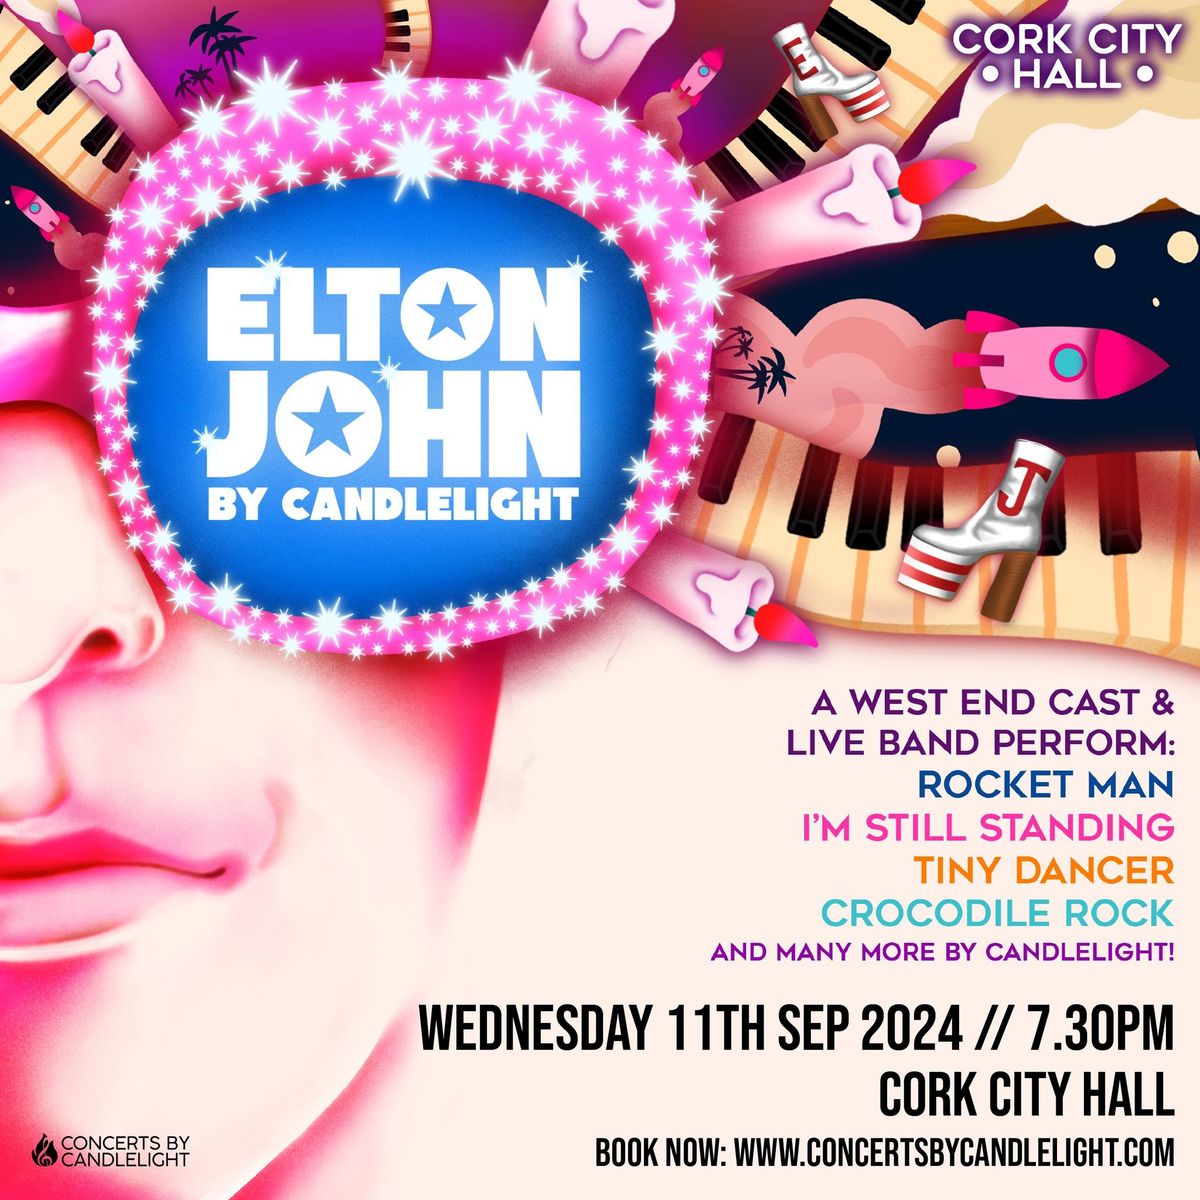 The Music Of Elton John By Candlelight At Cork City Hall